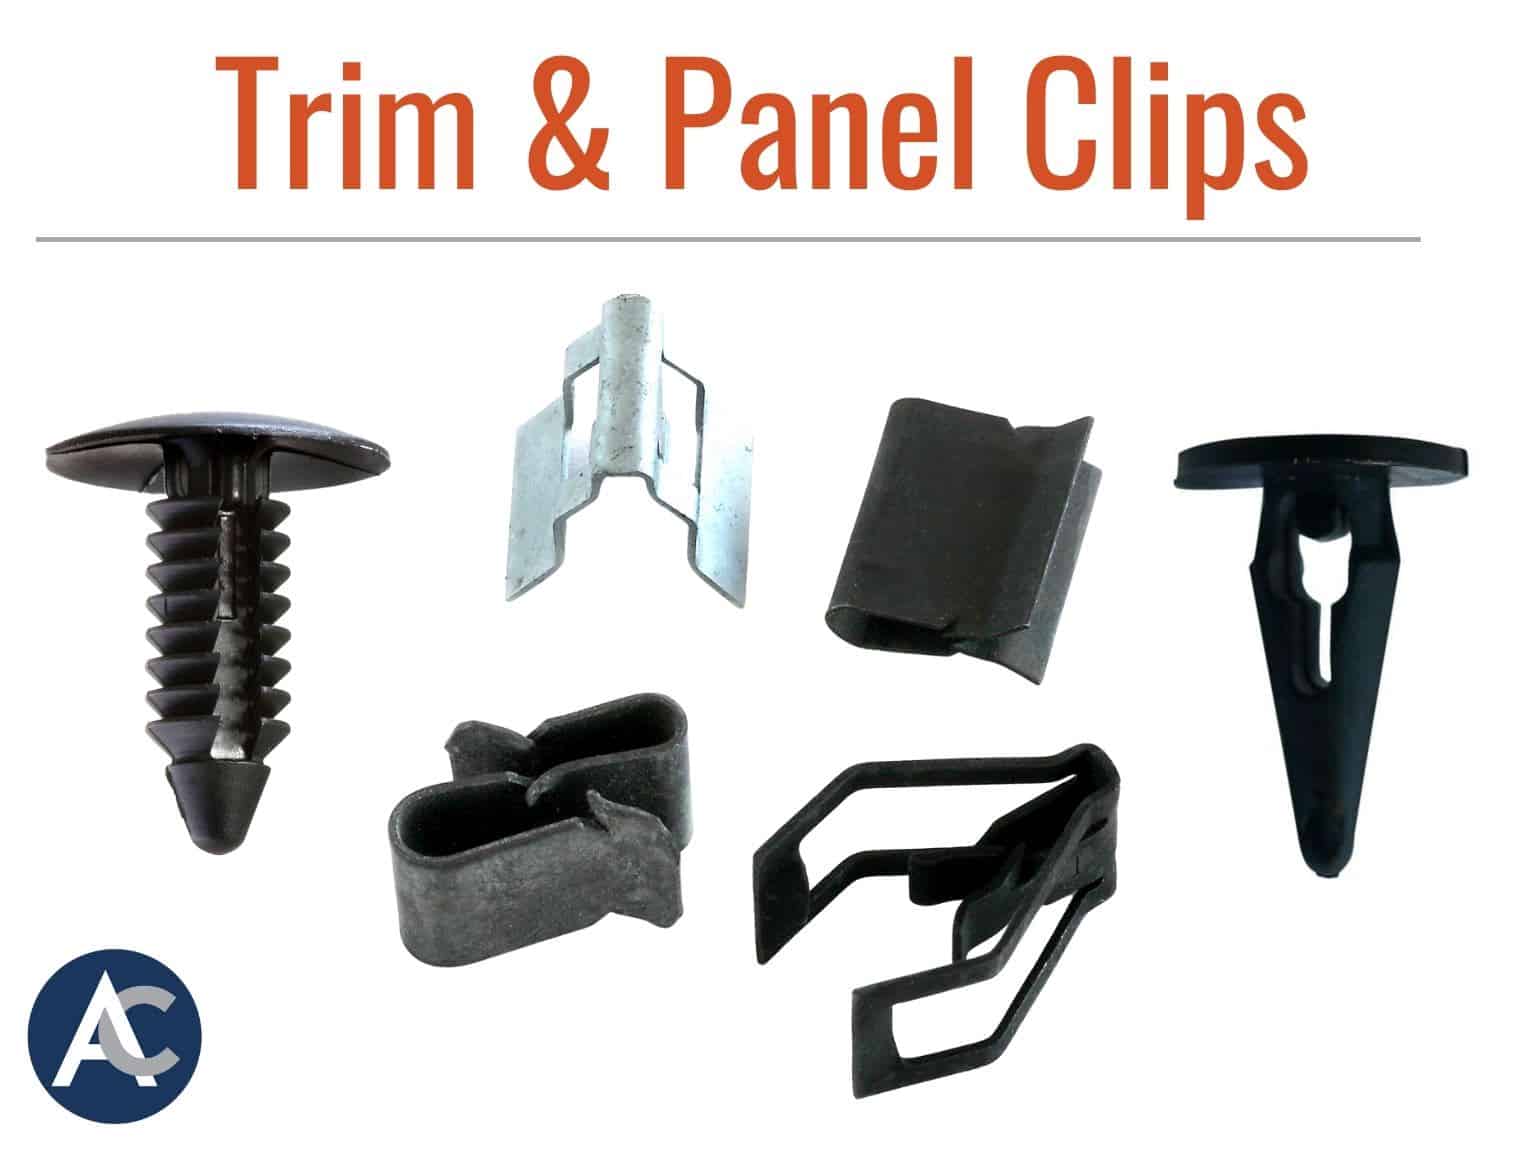 Trim & Panel Clips: Snap or Slide-On - Supply / Advance Components